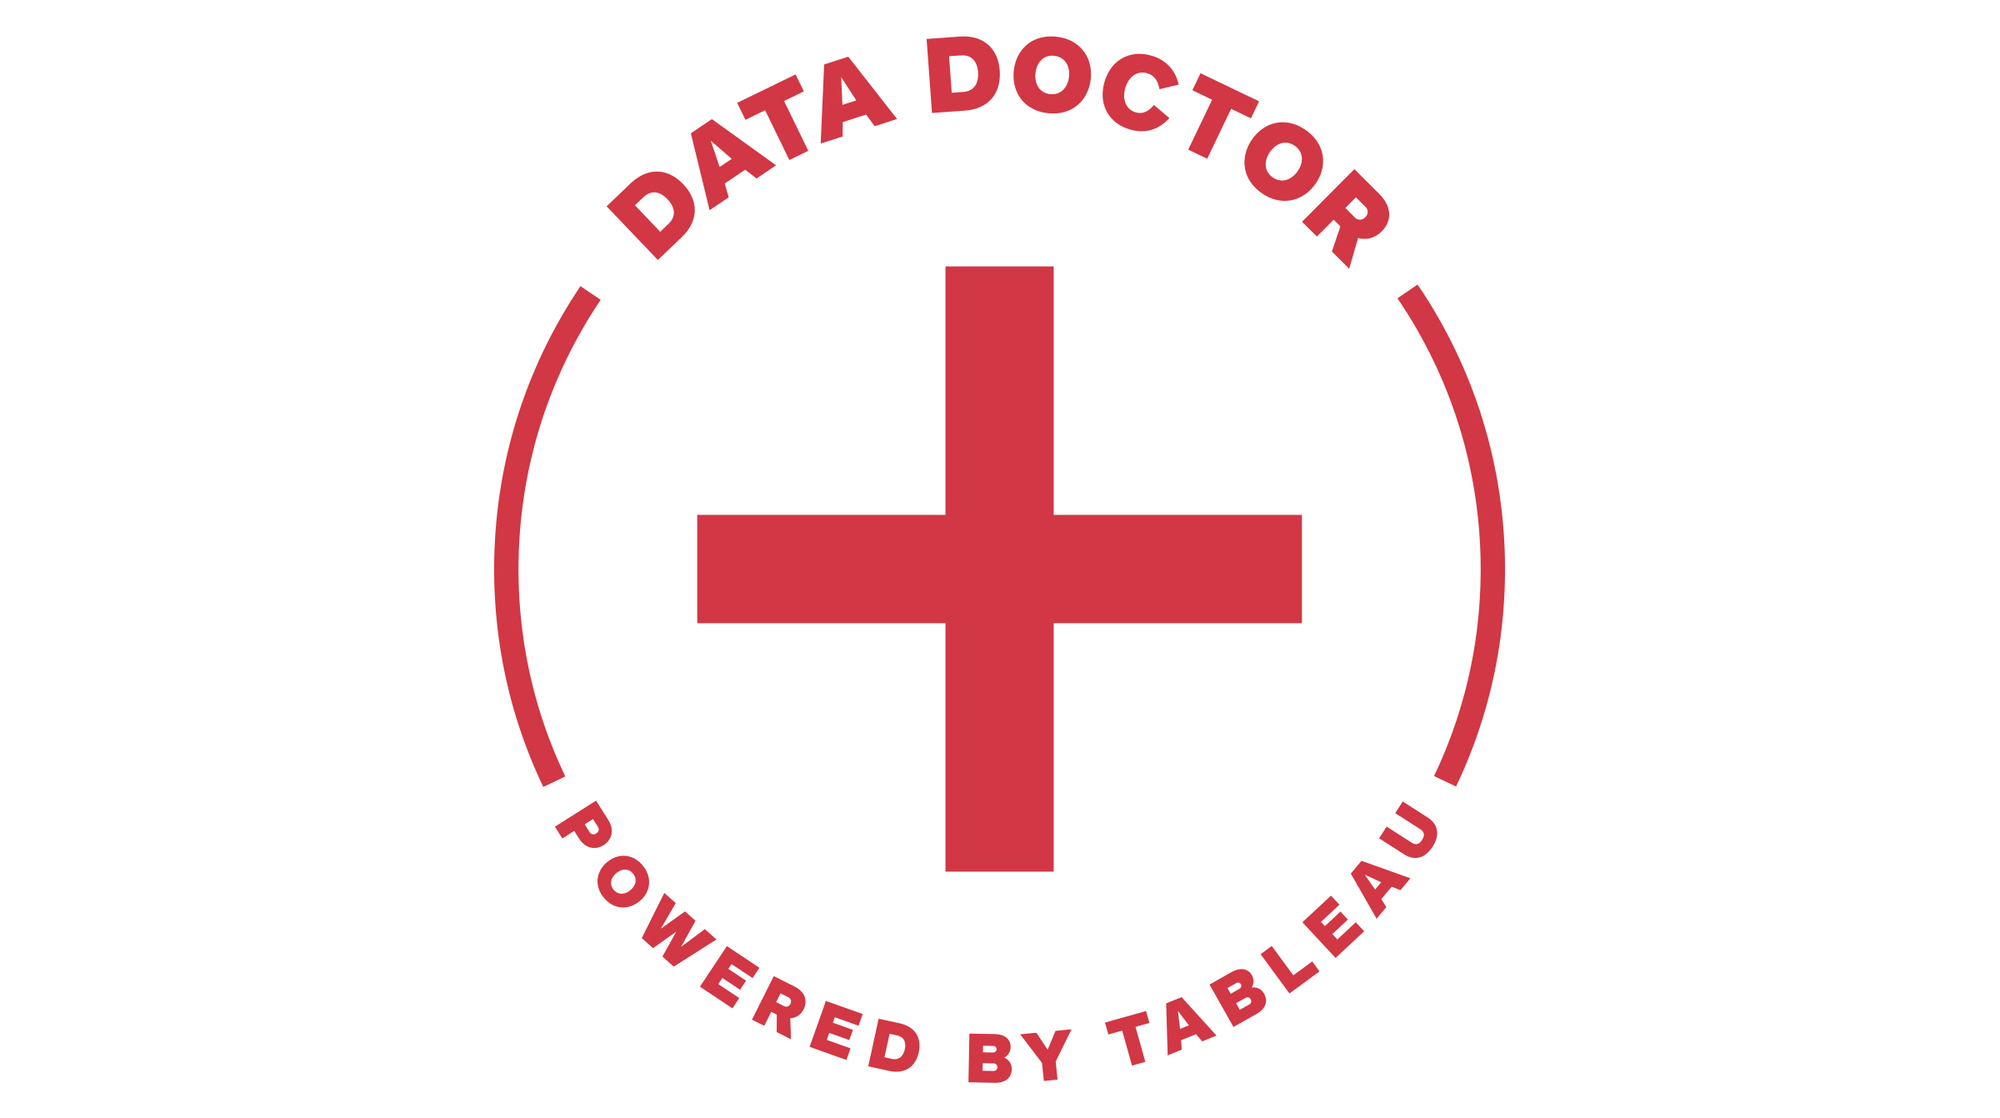 Navigate to Toolkit: Data Doctor